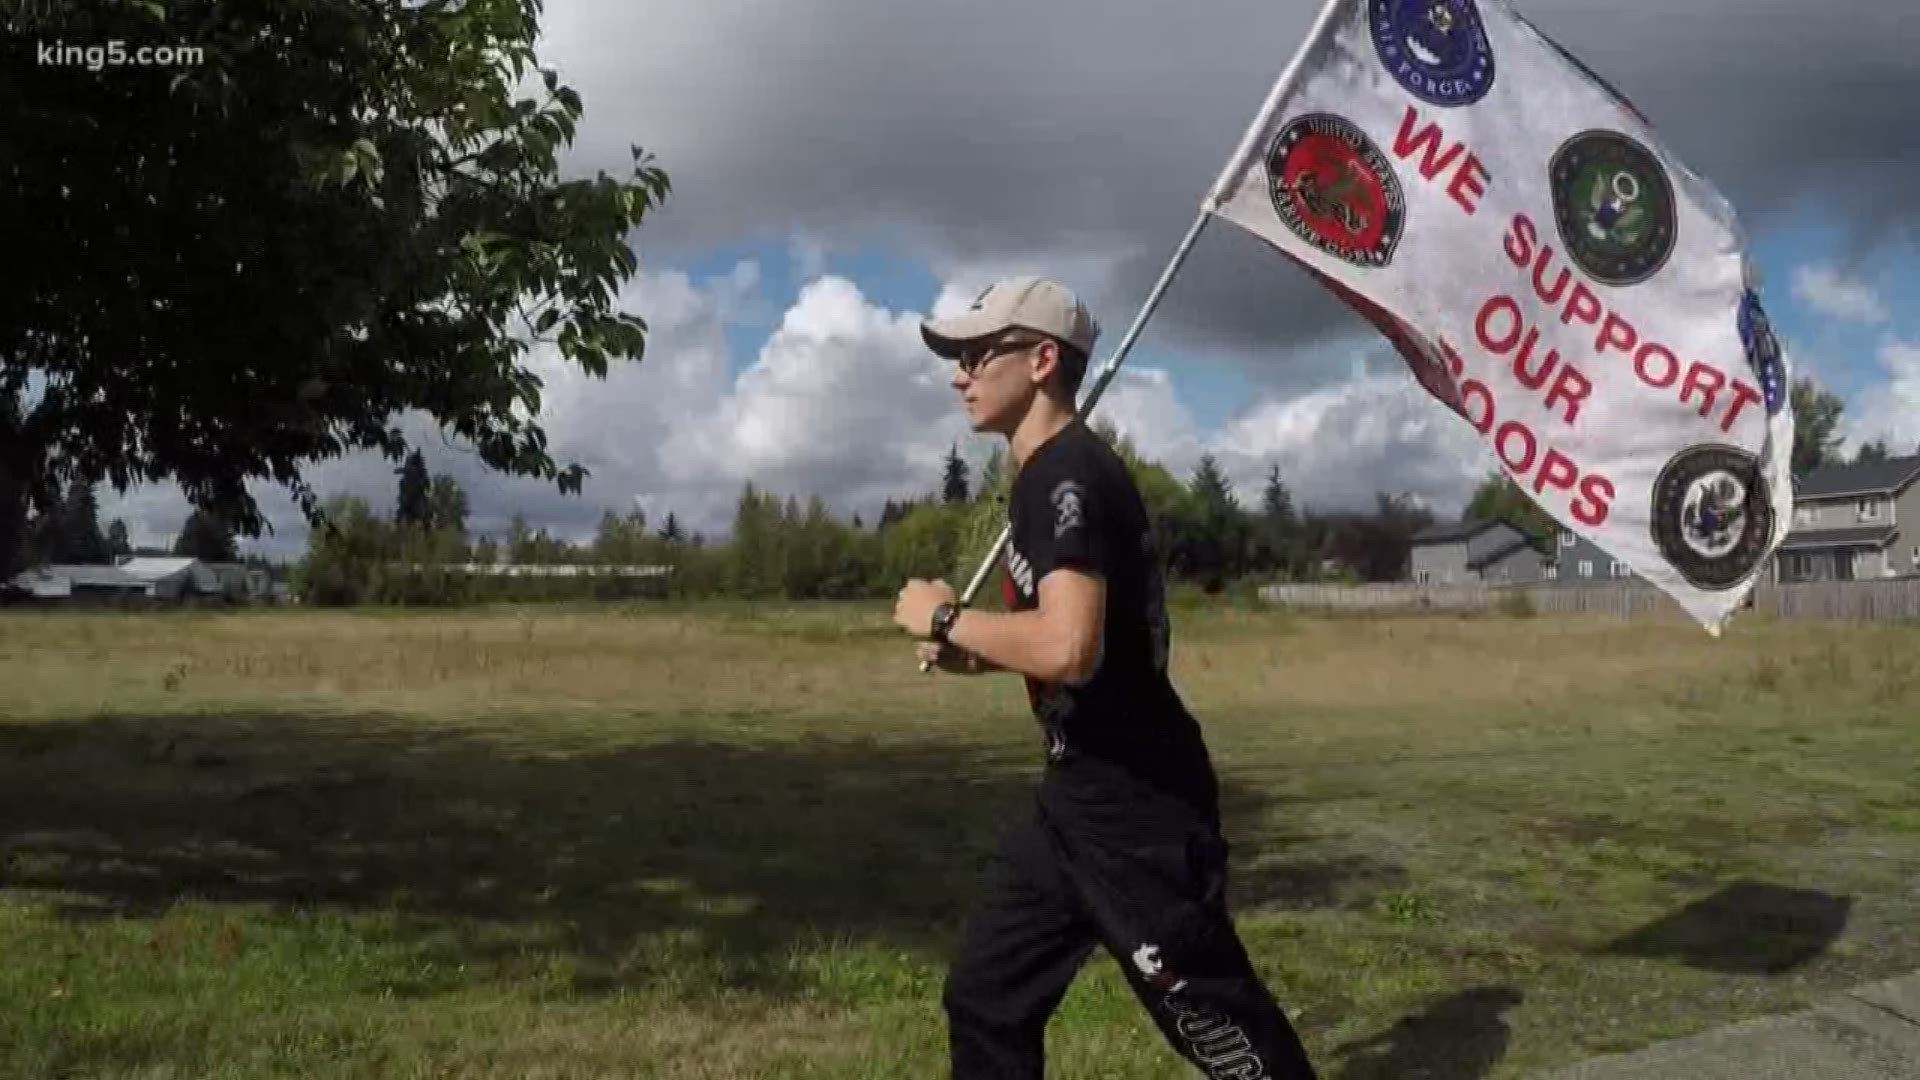 Tyee Eliason runs two to three miles a day carrying the American flag to prevent veteran suicides.